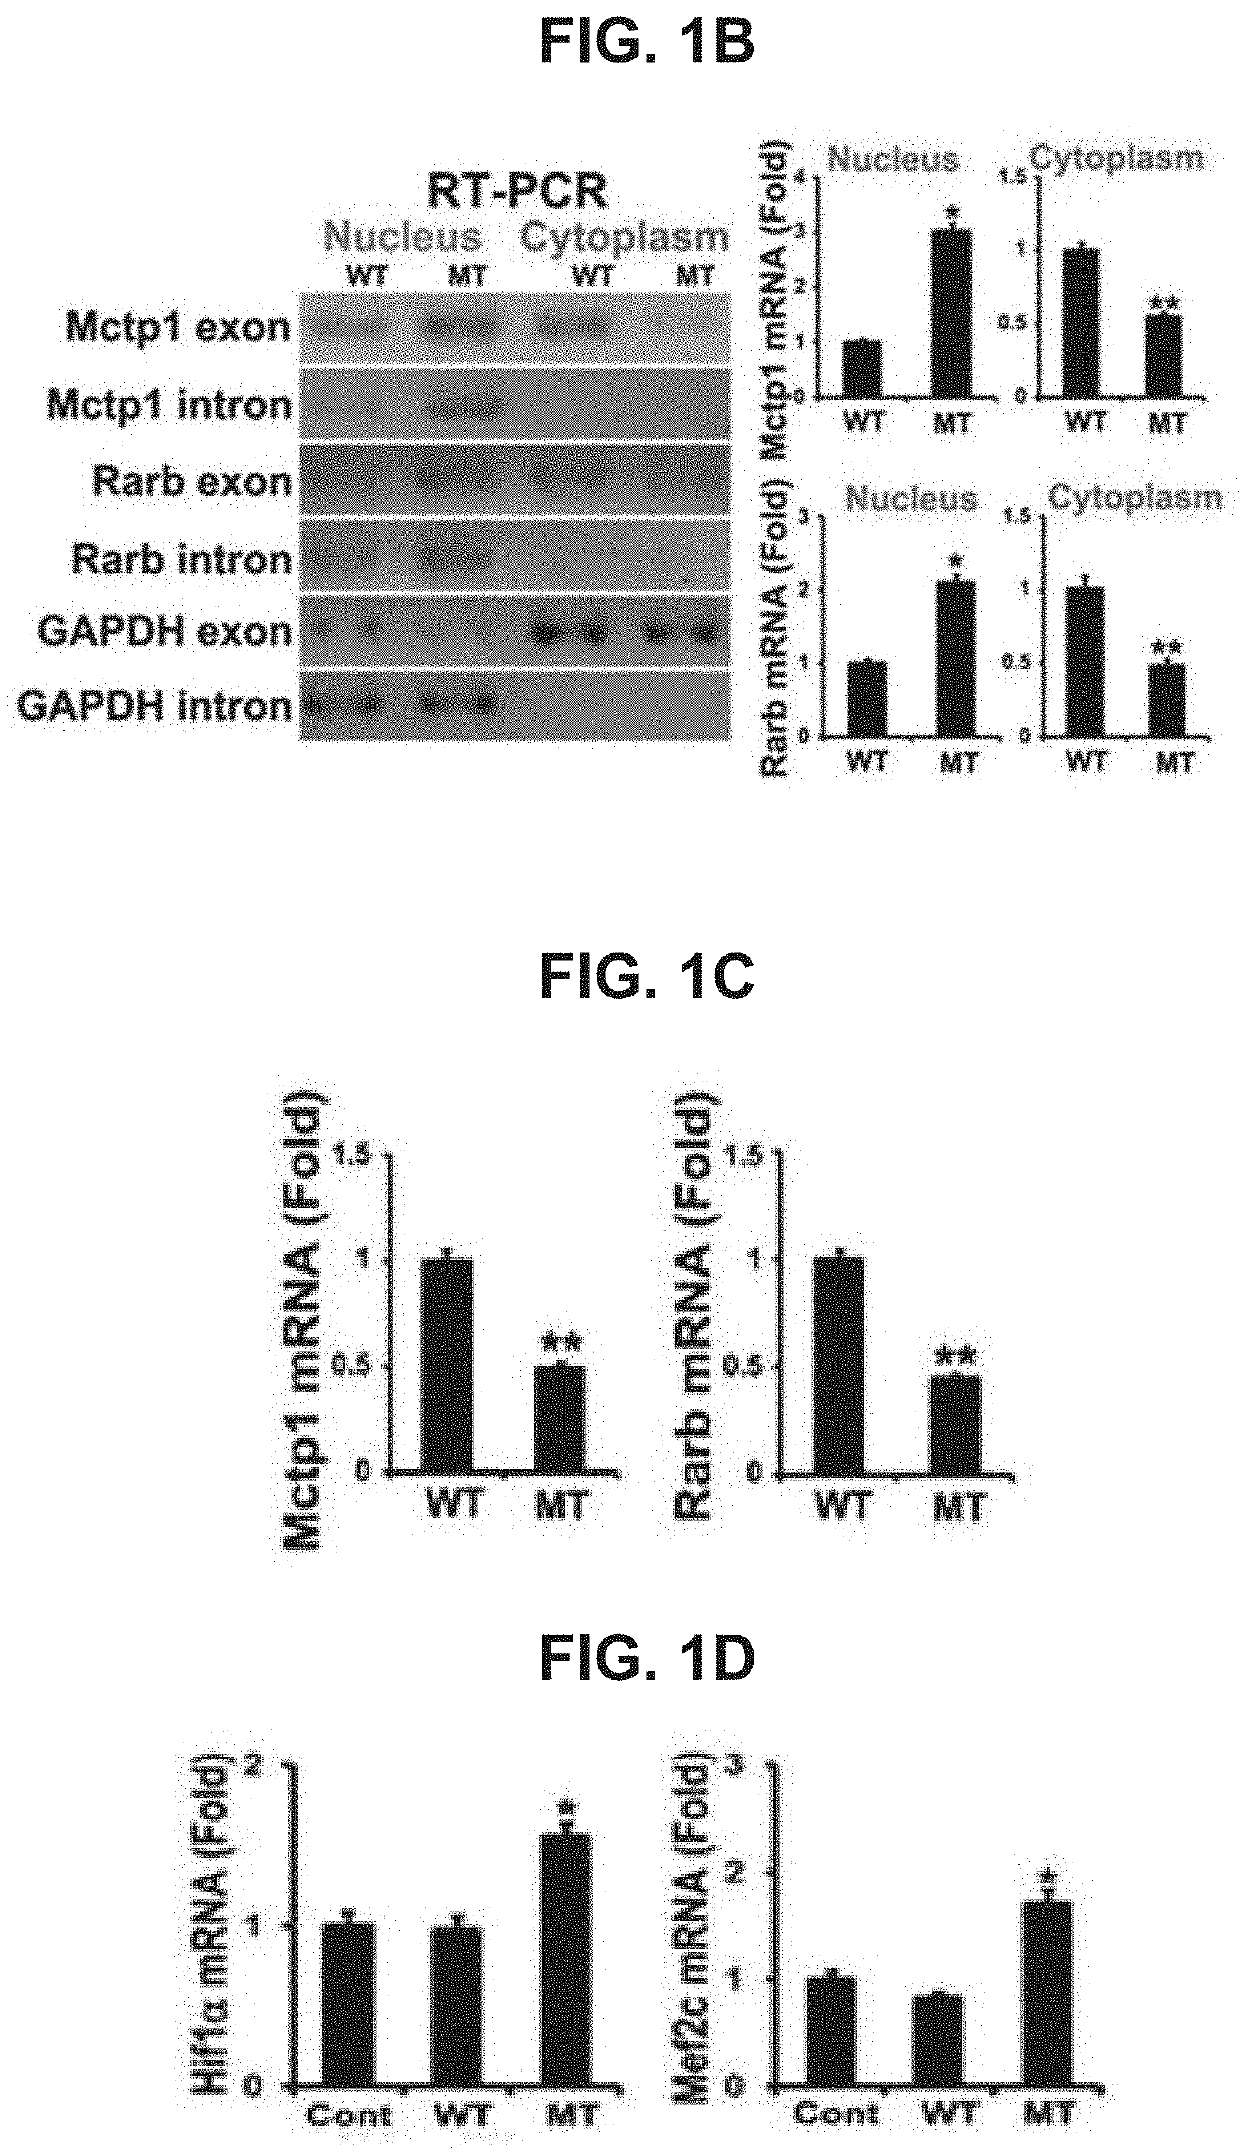 USE OF miR-18b FOR PREVENTION, TREATMENT, OR DIAGNOSIS OF MUSCLE DISEASE AND NEUROMUSCULAR DISEASE